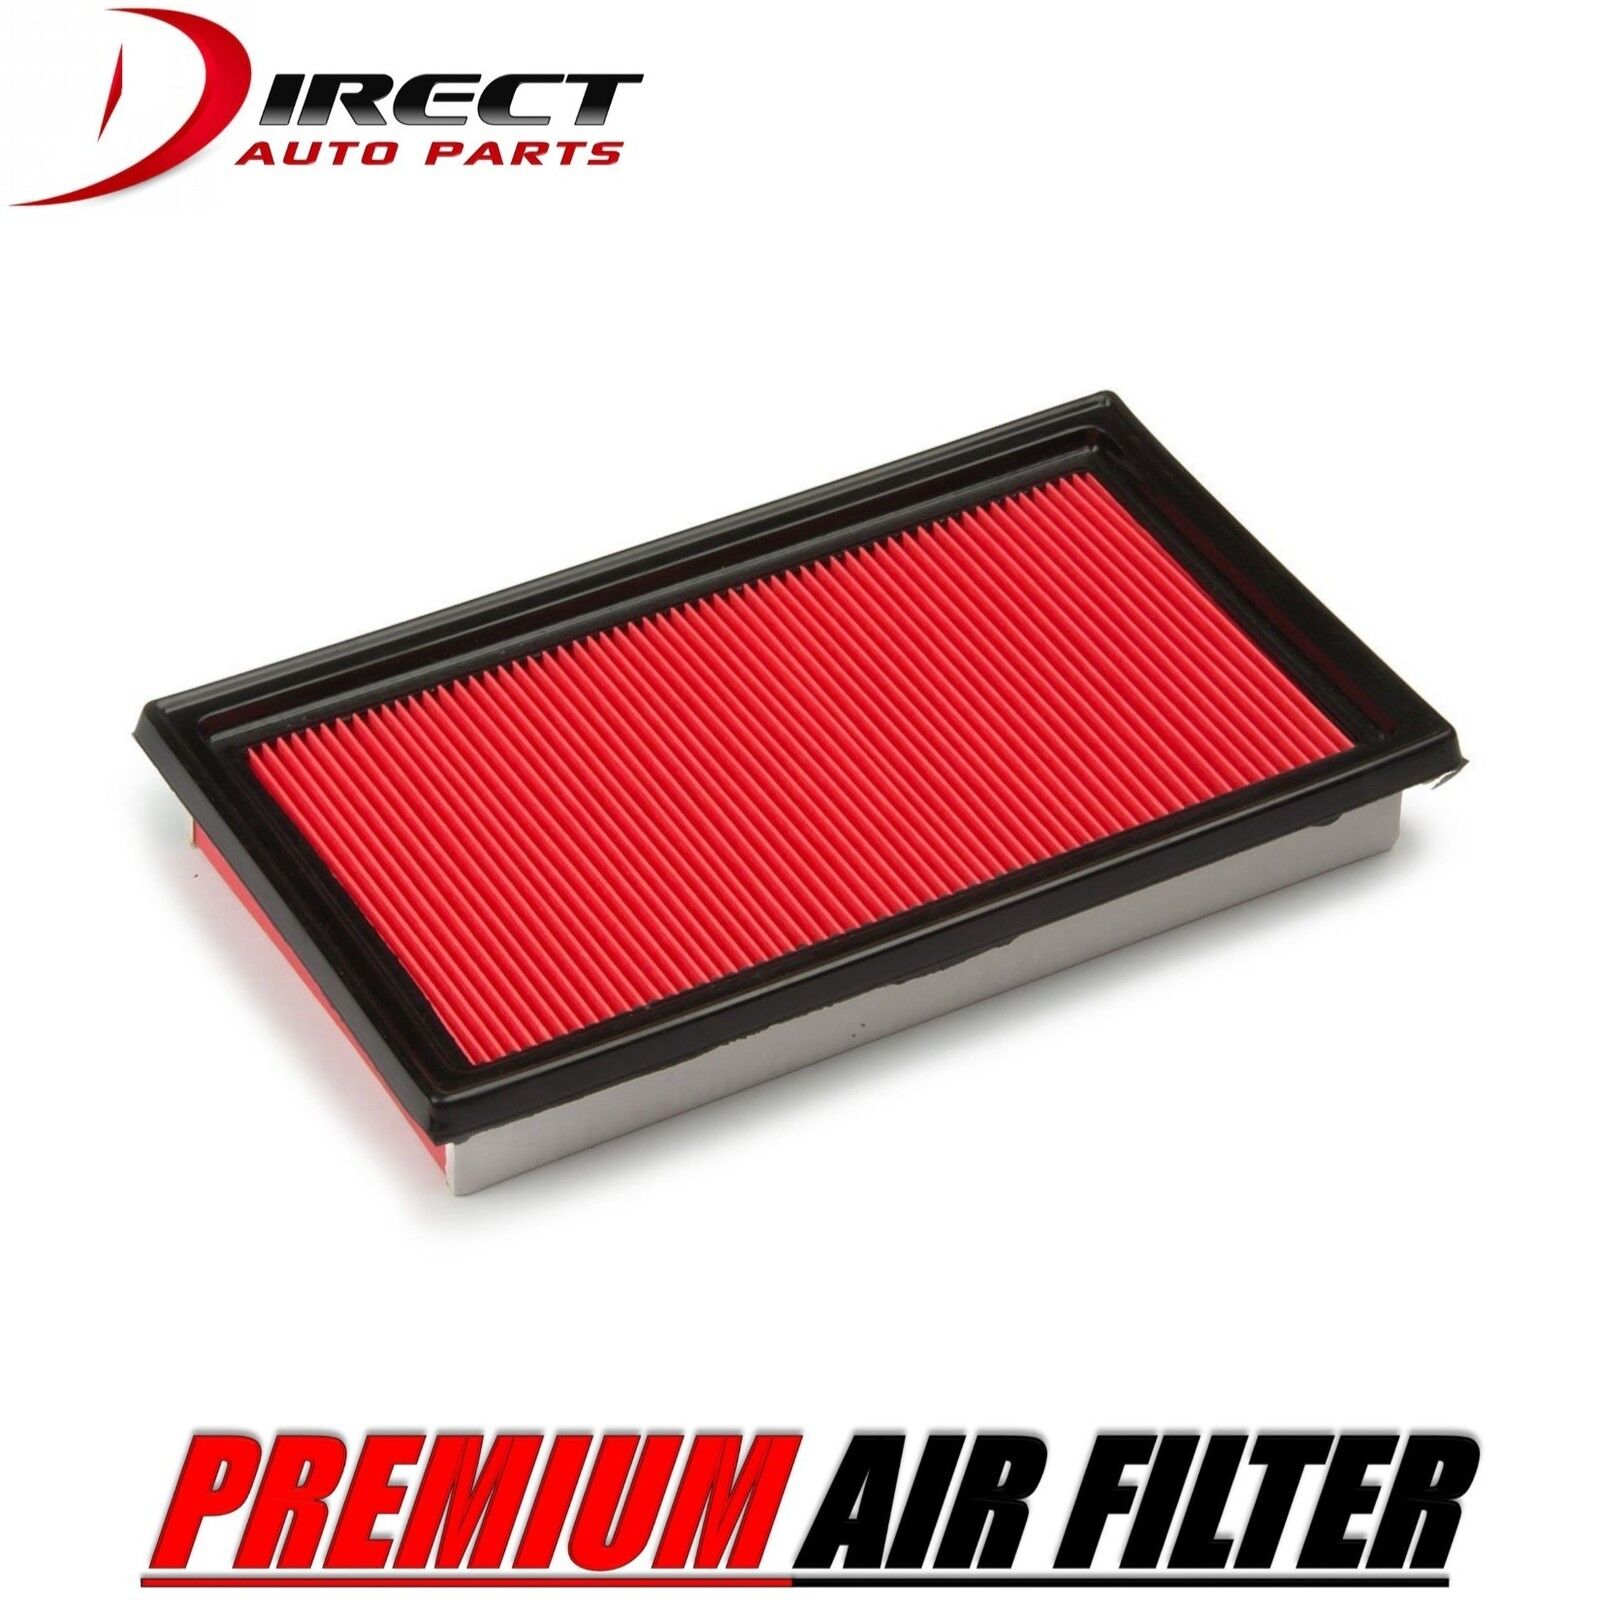 AIR FILTER FOR NISSAN FITS MURANO 3.5L ENGINE 2003 - 2016